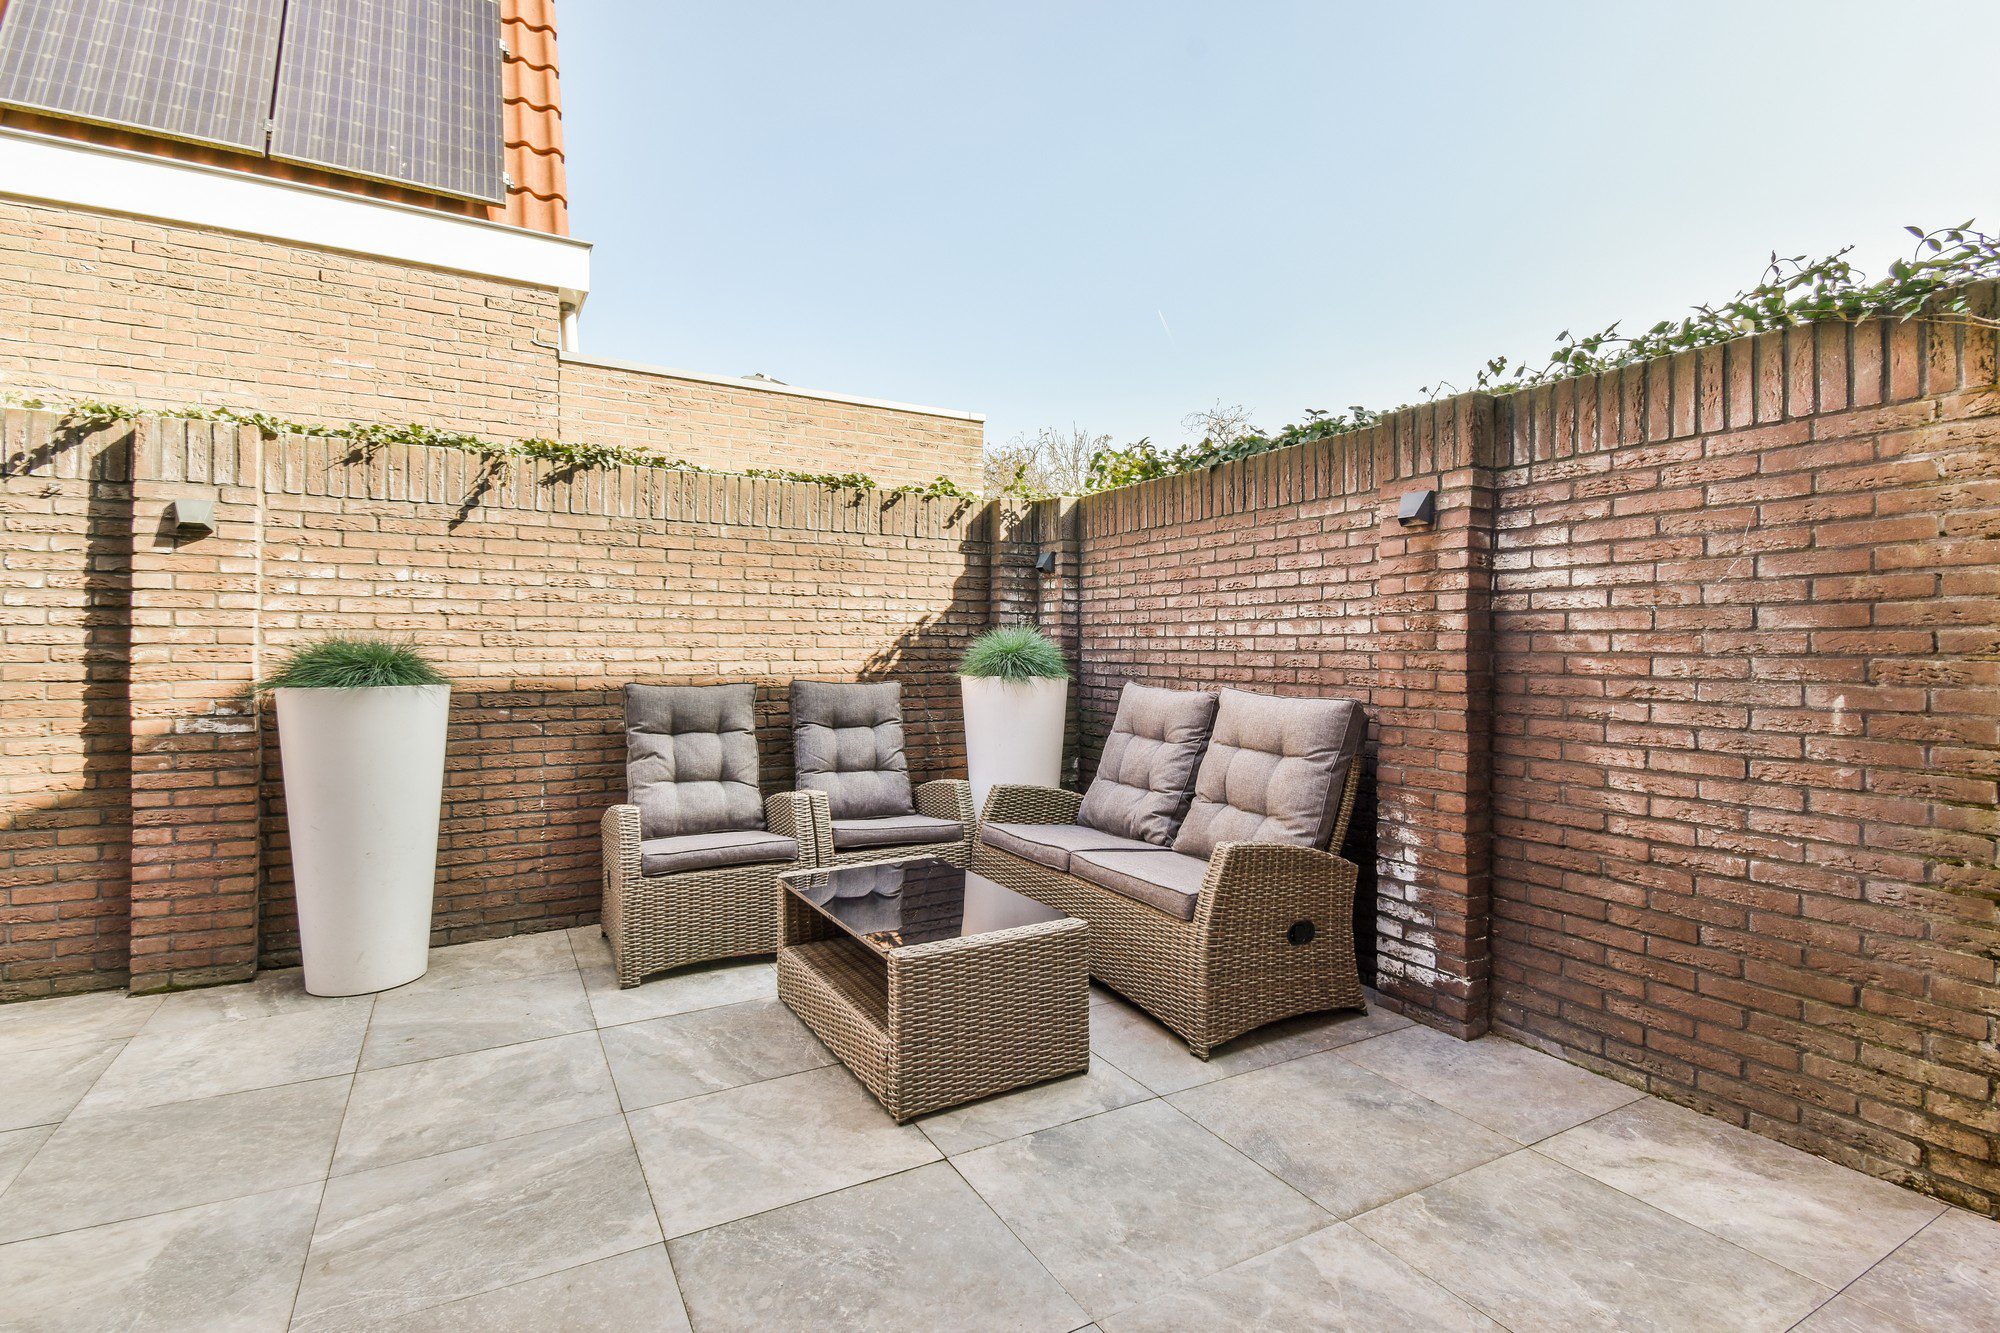 This image depicts an outdoor patio area with a brick wall surrounding it. The patio is furnished with a set of wicker garden furniture that includes a love seat, two armchairs, and a glass-topped coffee table. Each piece of furniture is outfitted with plush gray cushions for added comfort. In the corner of the patio stands a tall white planter containing a green plant, which adds a touch of nature to the setting. Above, the edges of a building's rooftop are visible, suggesting that this patio is close to a home or flat. The floor is covered with large, square, stone-coloured patio tiles. There's a lamp on the wall, indicating the presence of outdoor lighting. The sky is clear, indicative of good weather, which would make this an enjoyable outdoor space for relaxation or social gatherings.